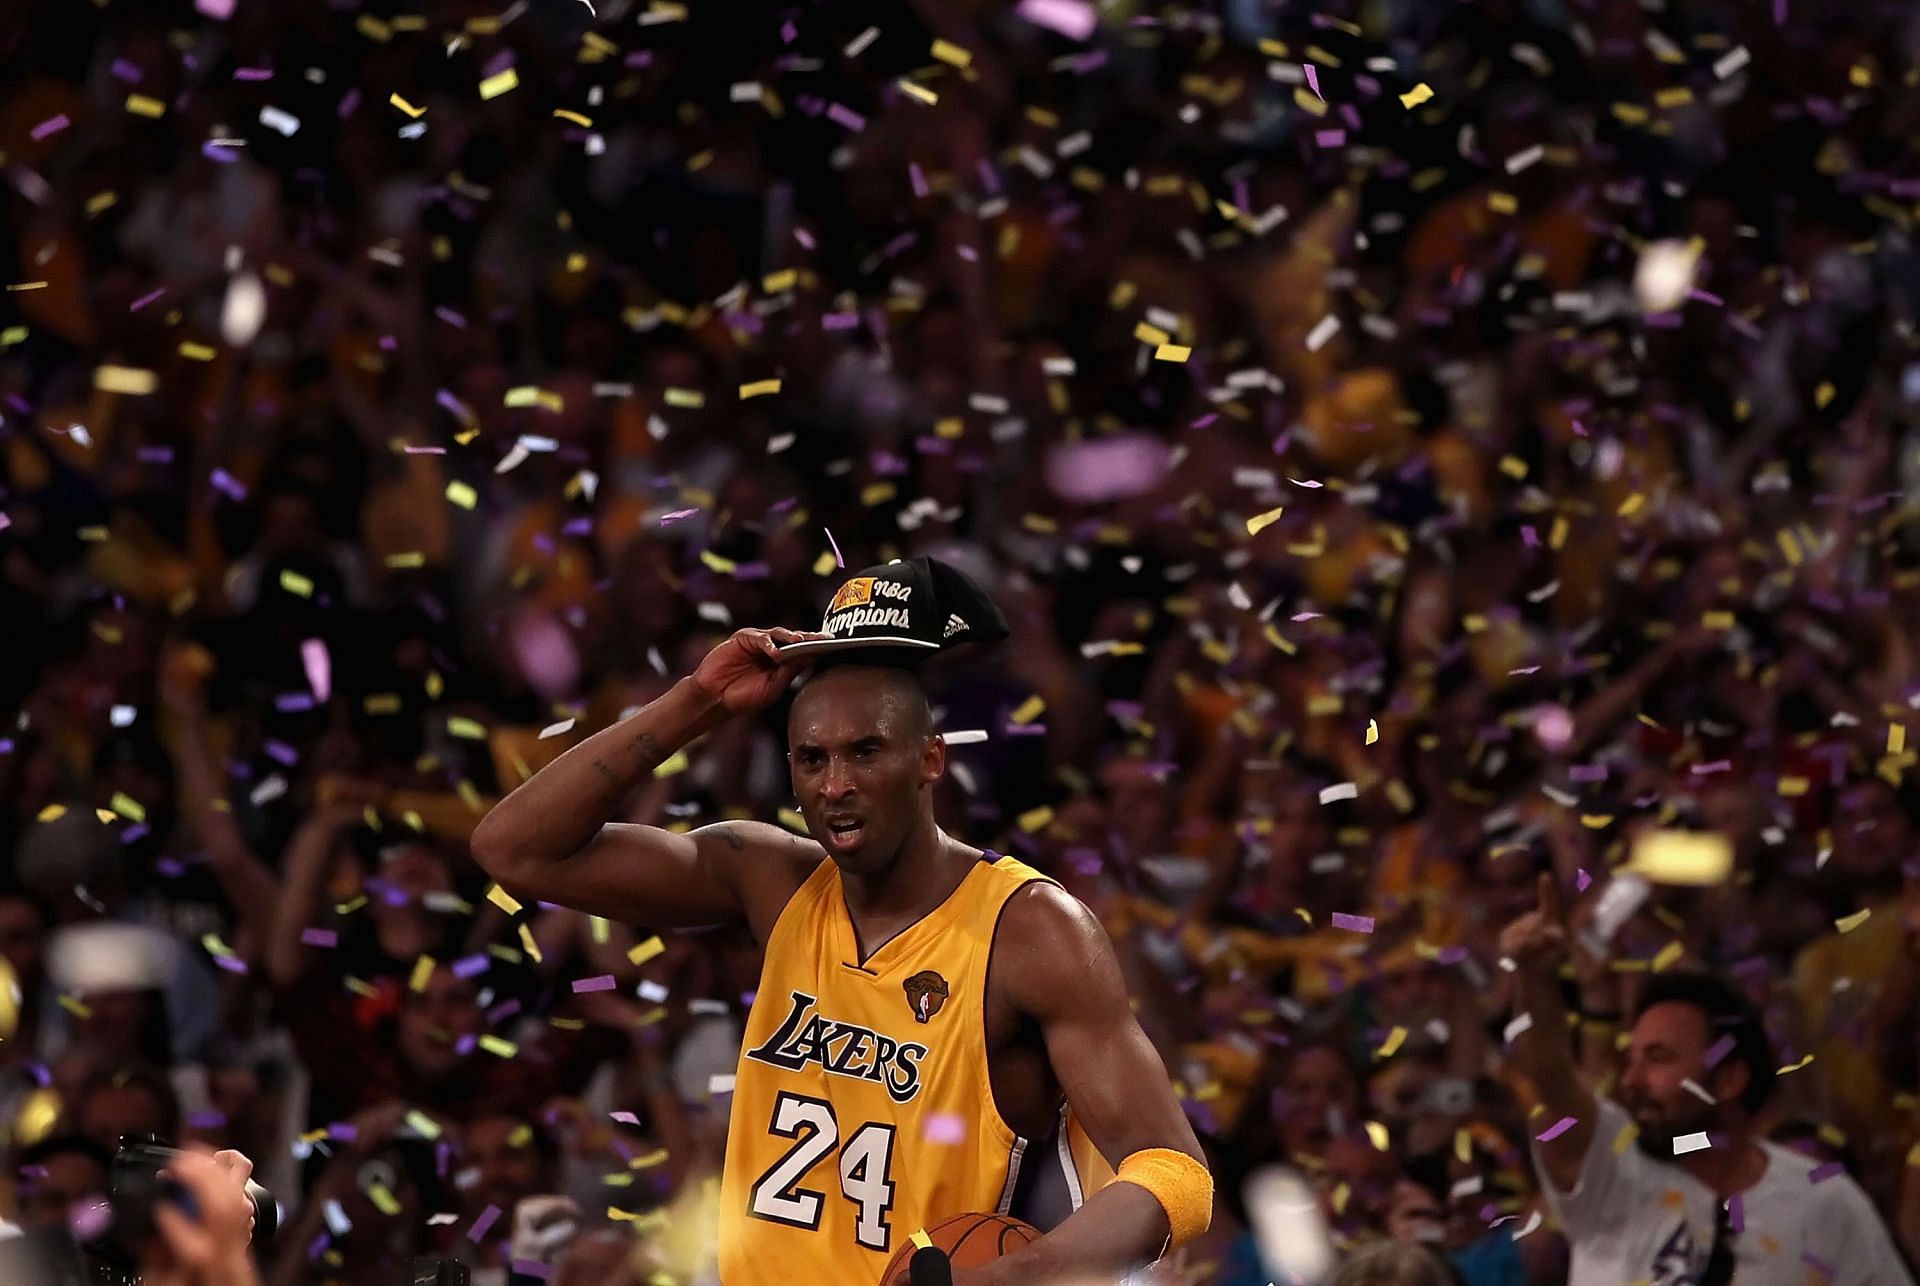 Kobe Bryant celebrates after beating the Boston Celtics in the 2010 NBA Finals.